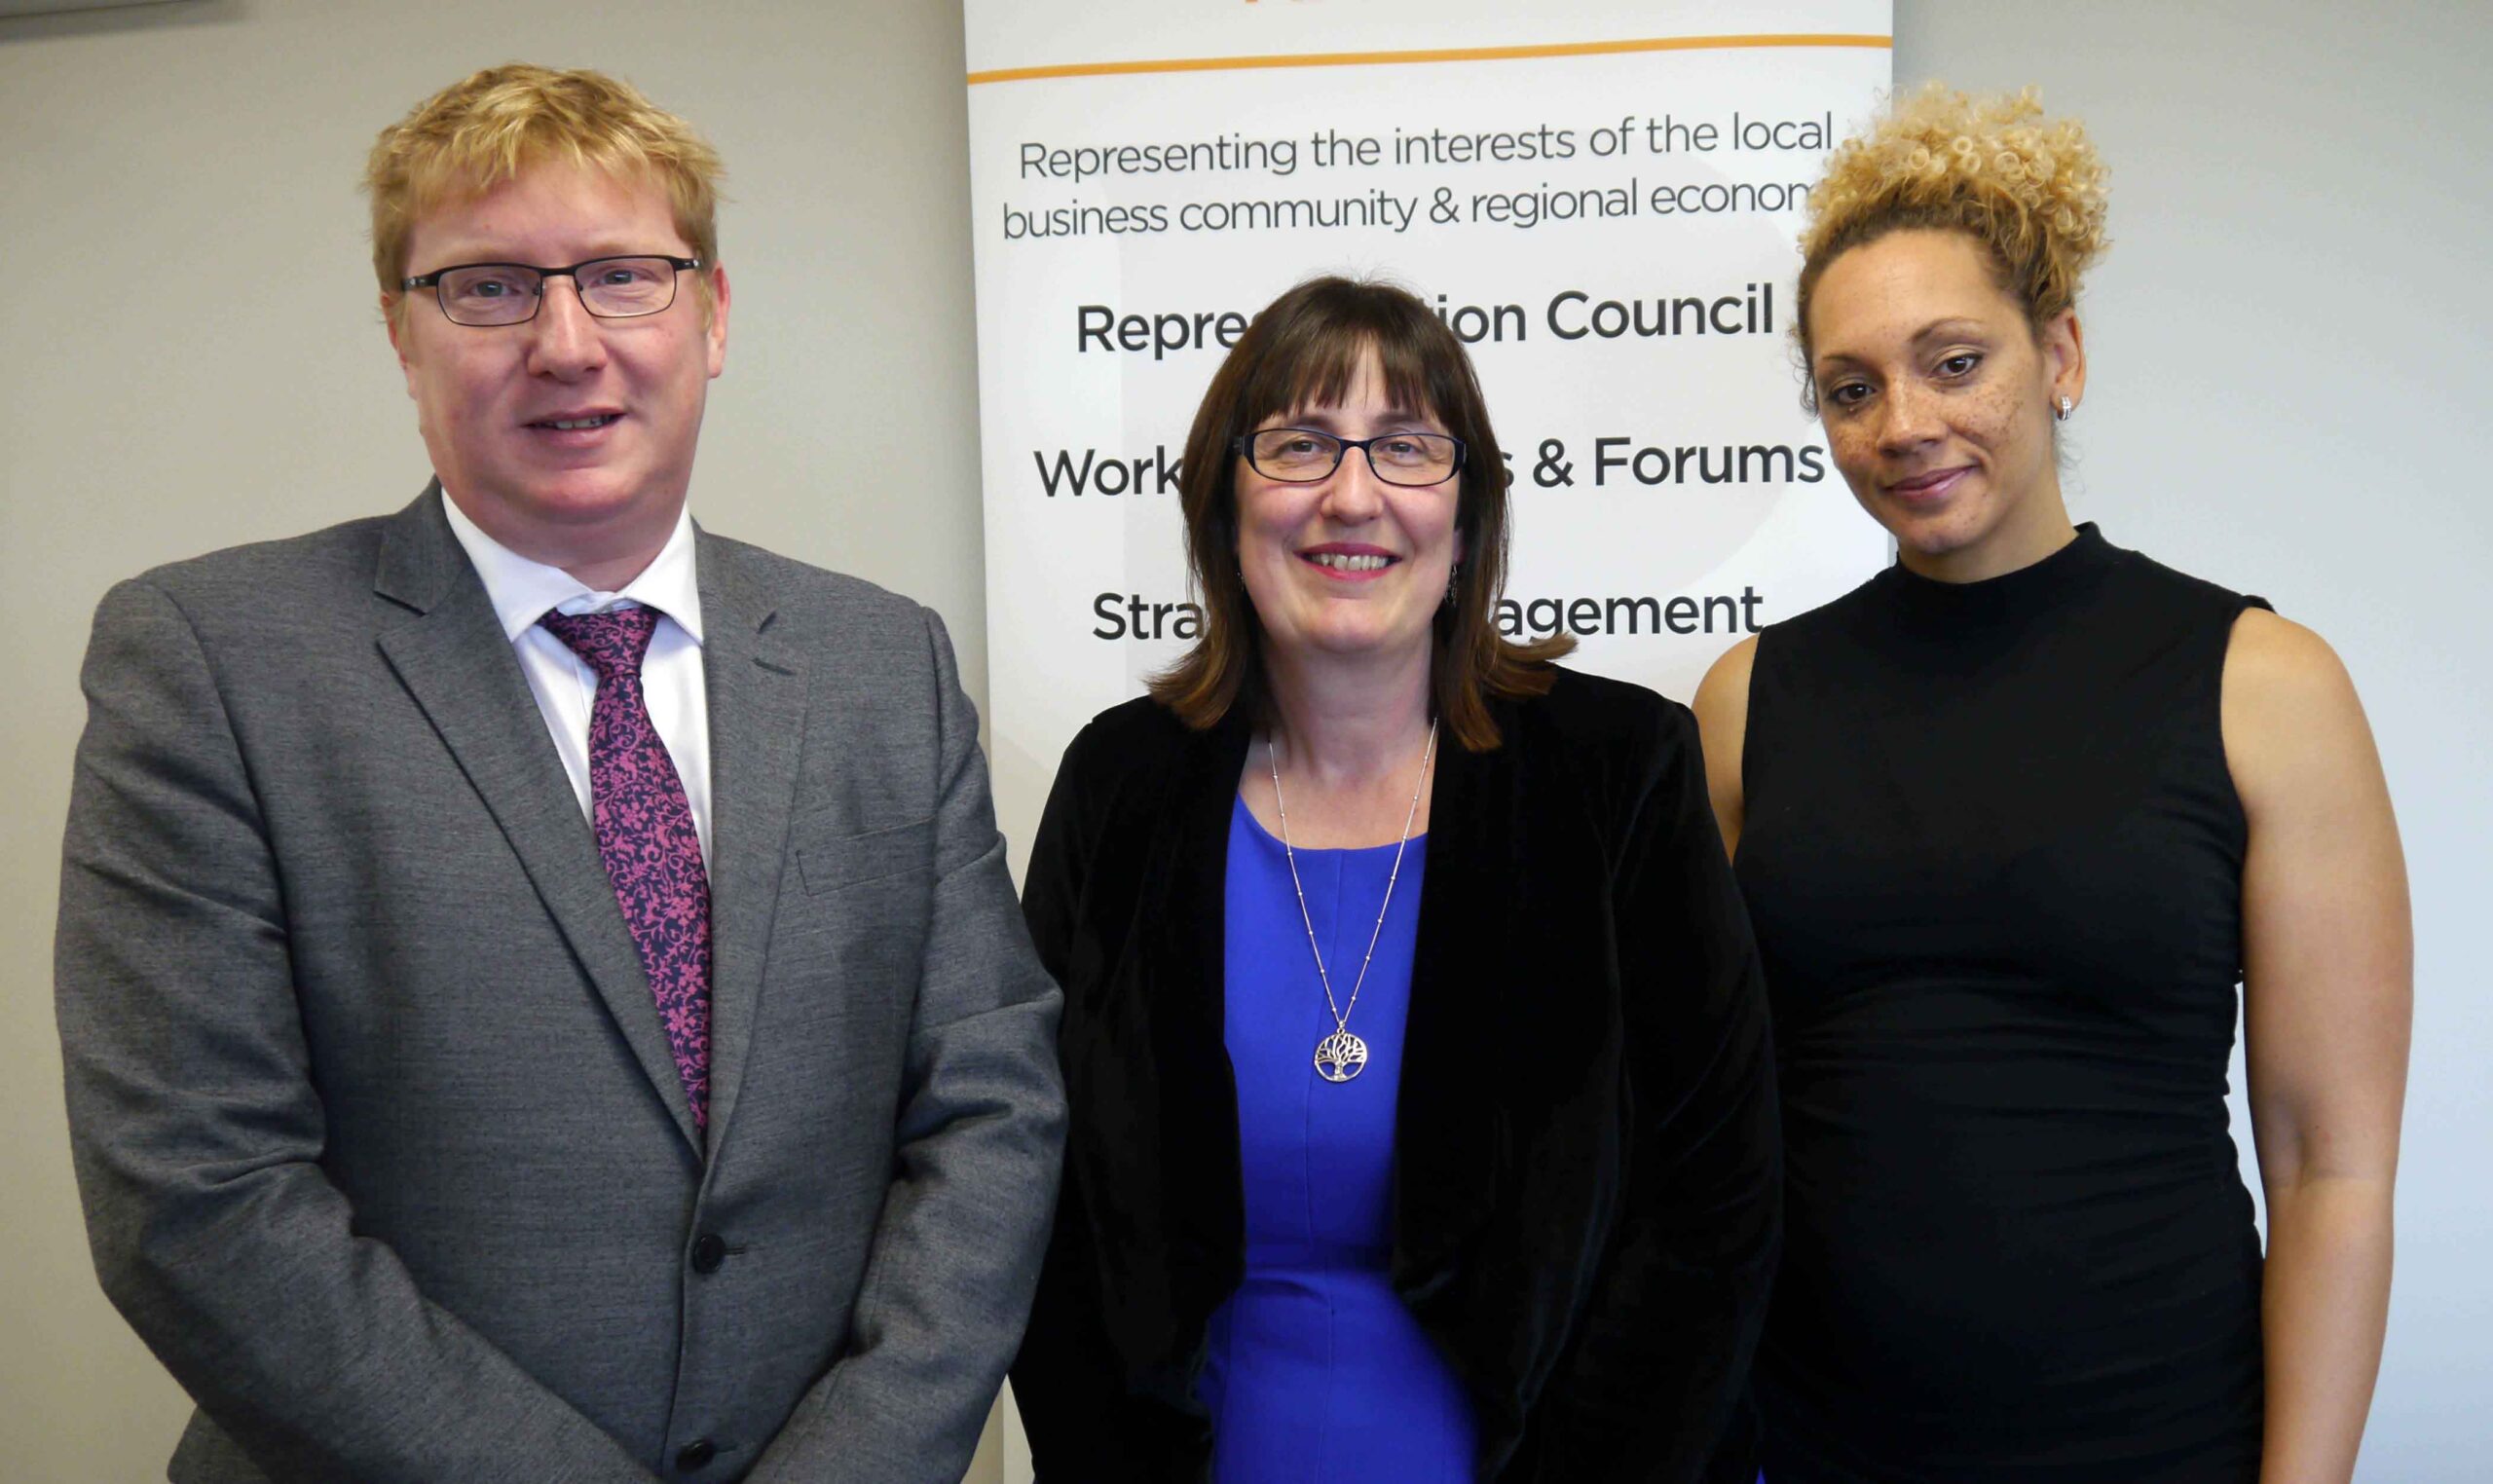 Chamber aims for future growth with appointment of two new non-executive directors